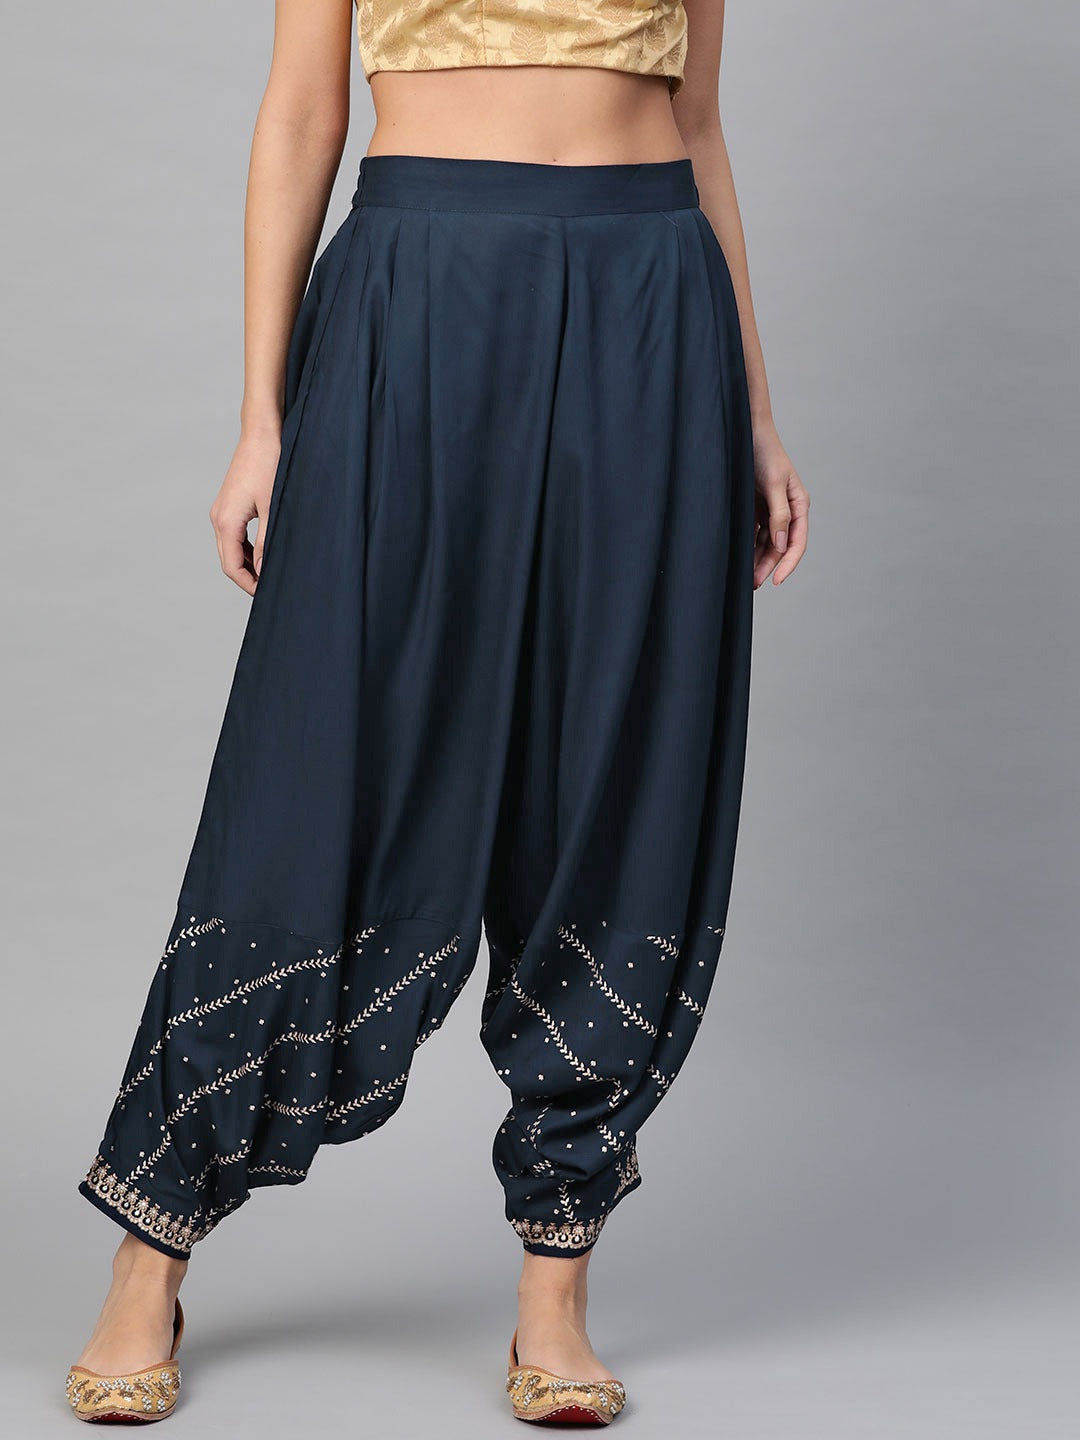 Navy & Gold Dhoti Salwar - Indian Clothing in Denver, CO, Aurora, CO, Boulder, CO, Fort Collins, CO, Colorado Springs, CO, Parker, CO, Highlands Ranch, CO, Cherry Creek, CO, Centennial, CO, and Longmont, CO. Nationwide shipping USA - India Fashion X